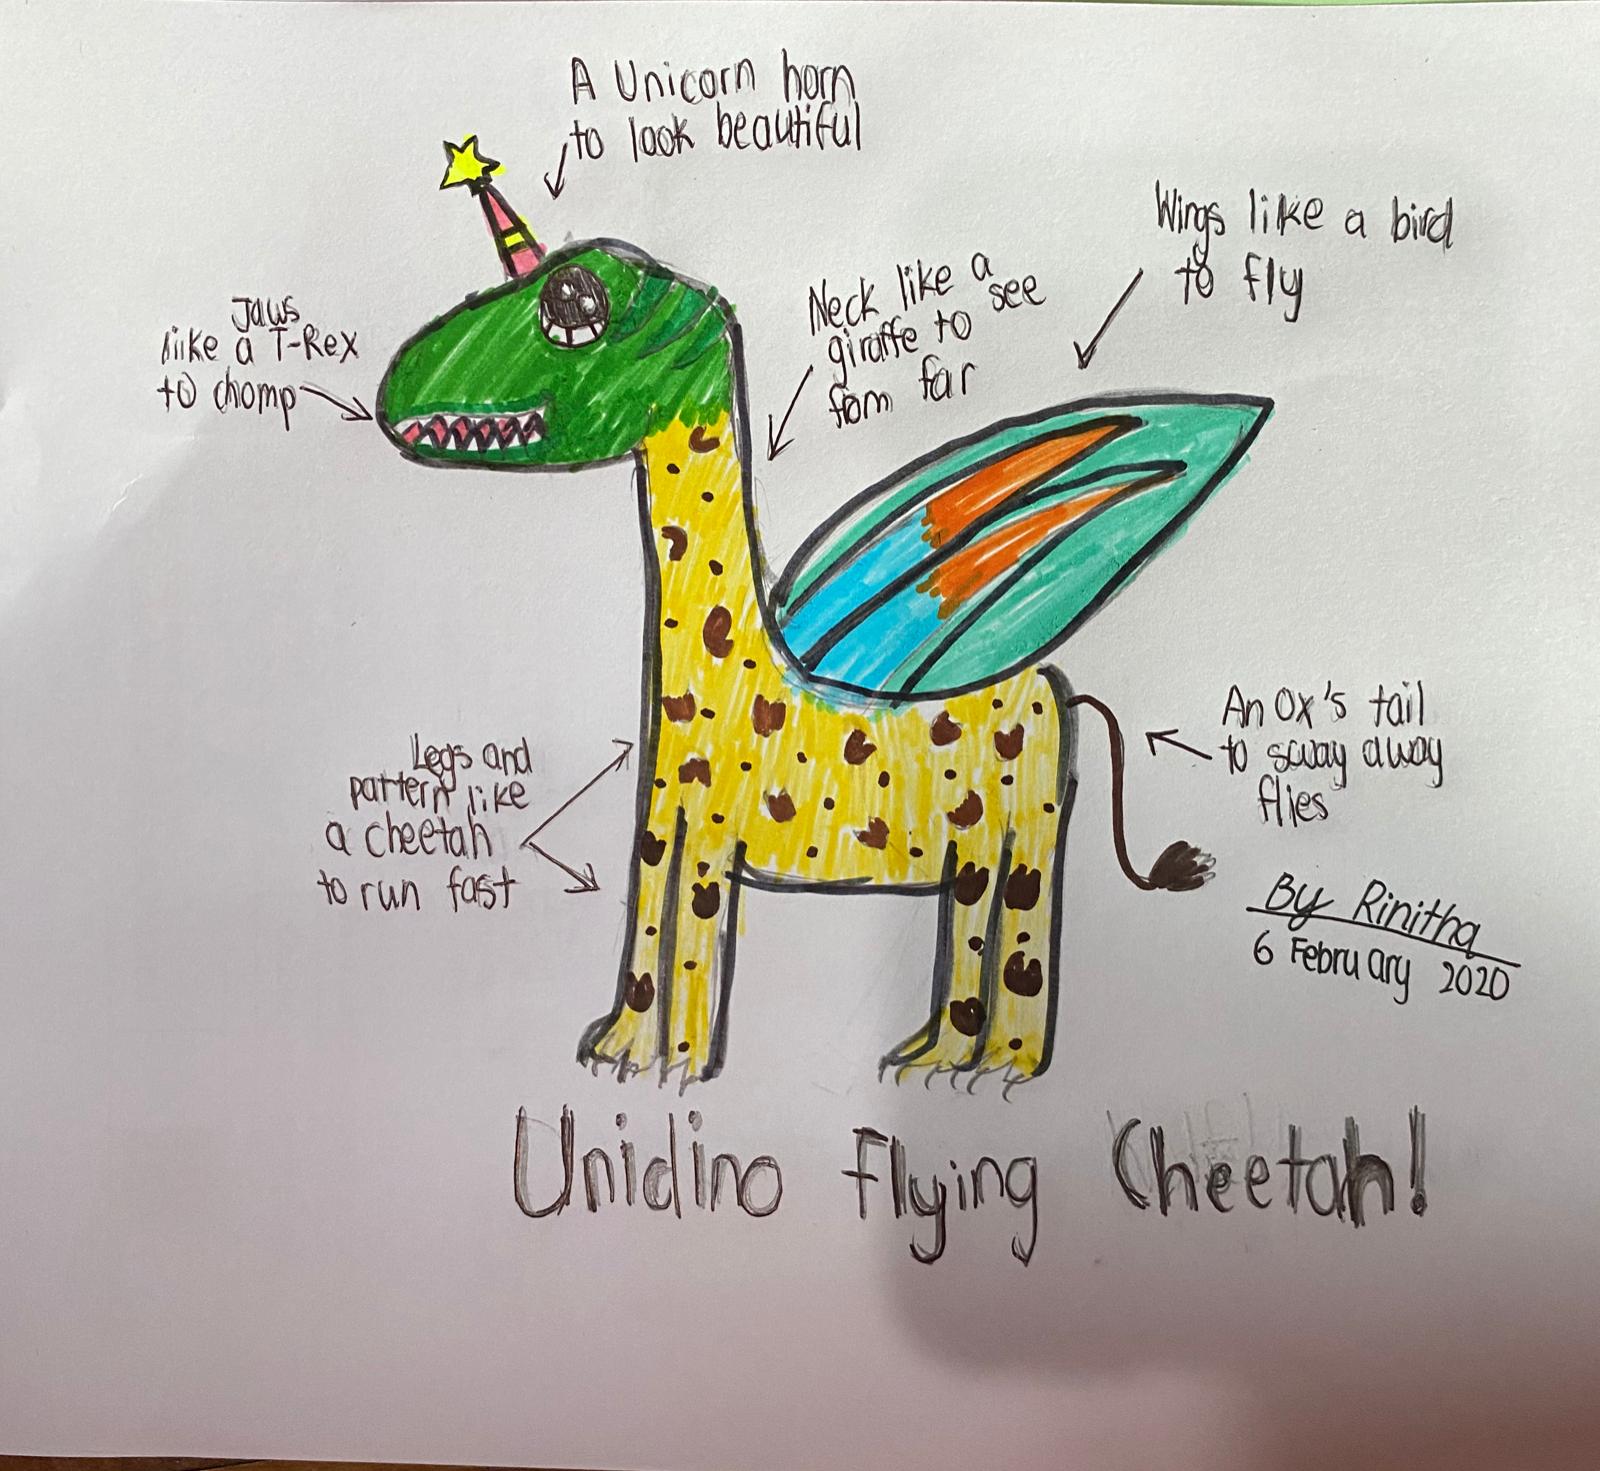 I am a Young Scientist: Featured project - An imaginary animal - by Rinitha